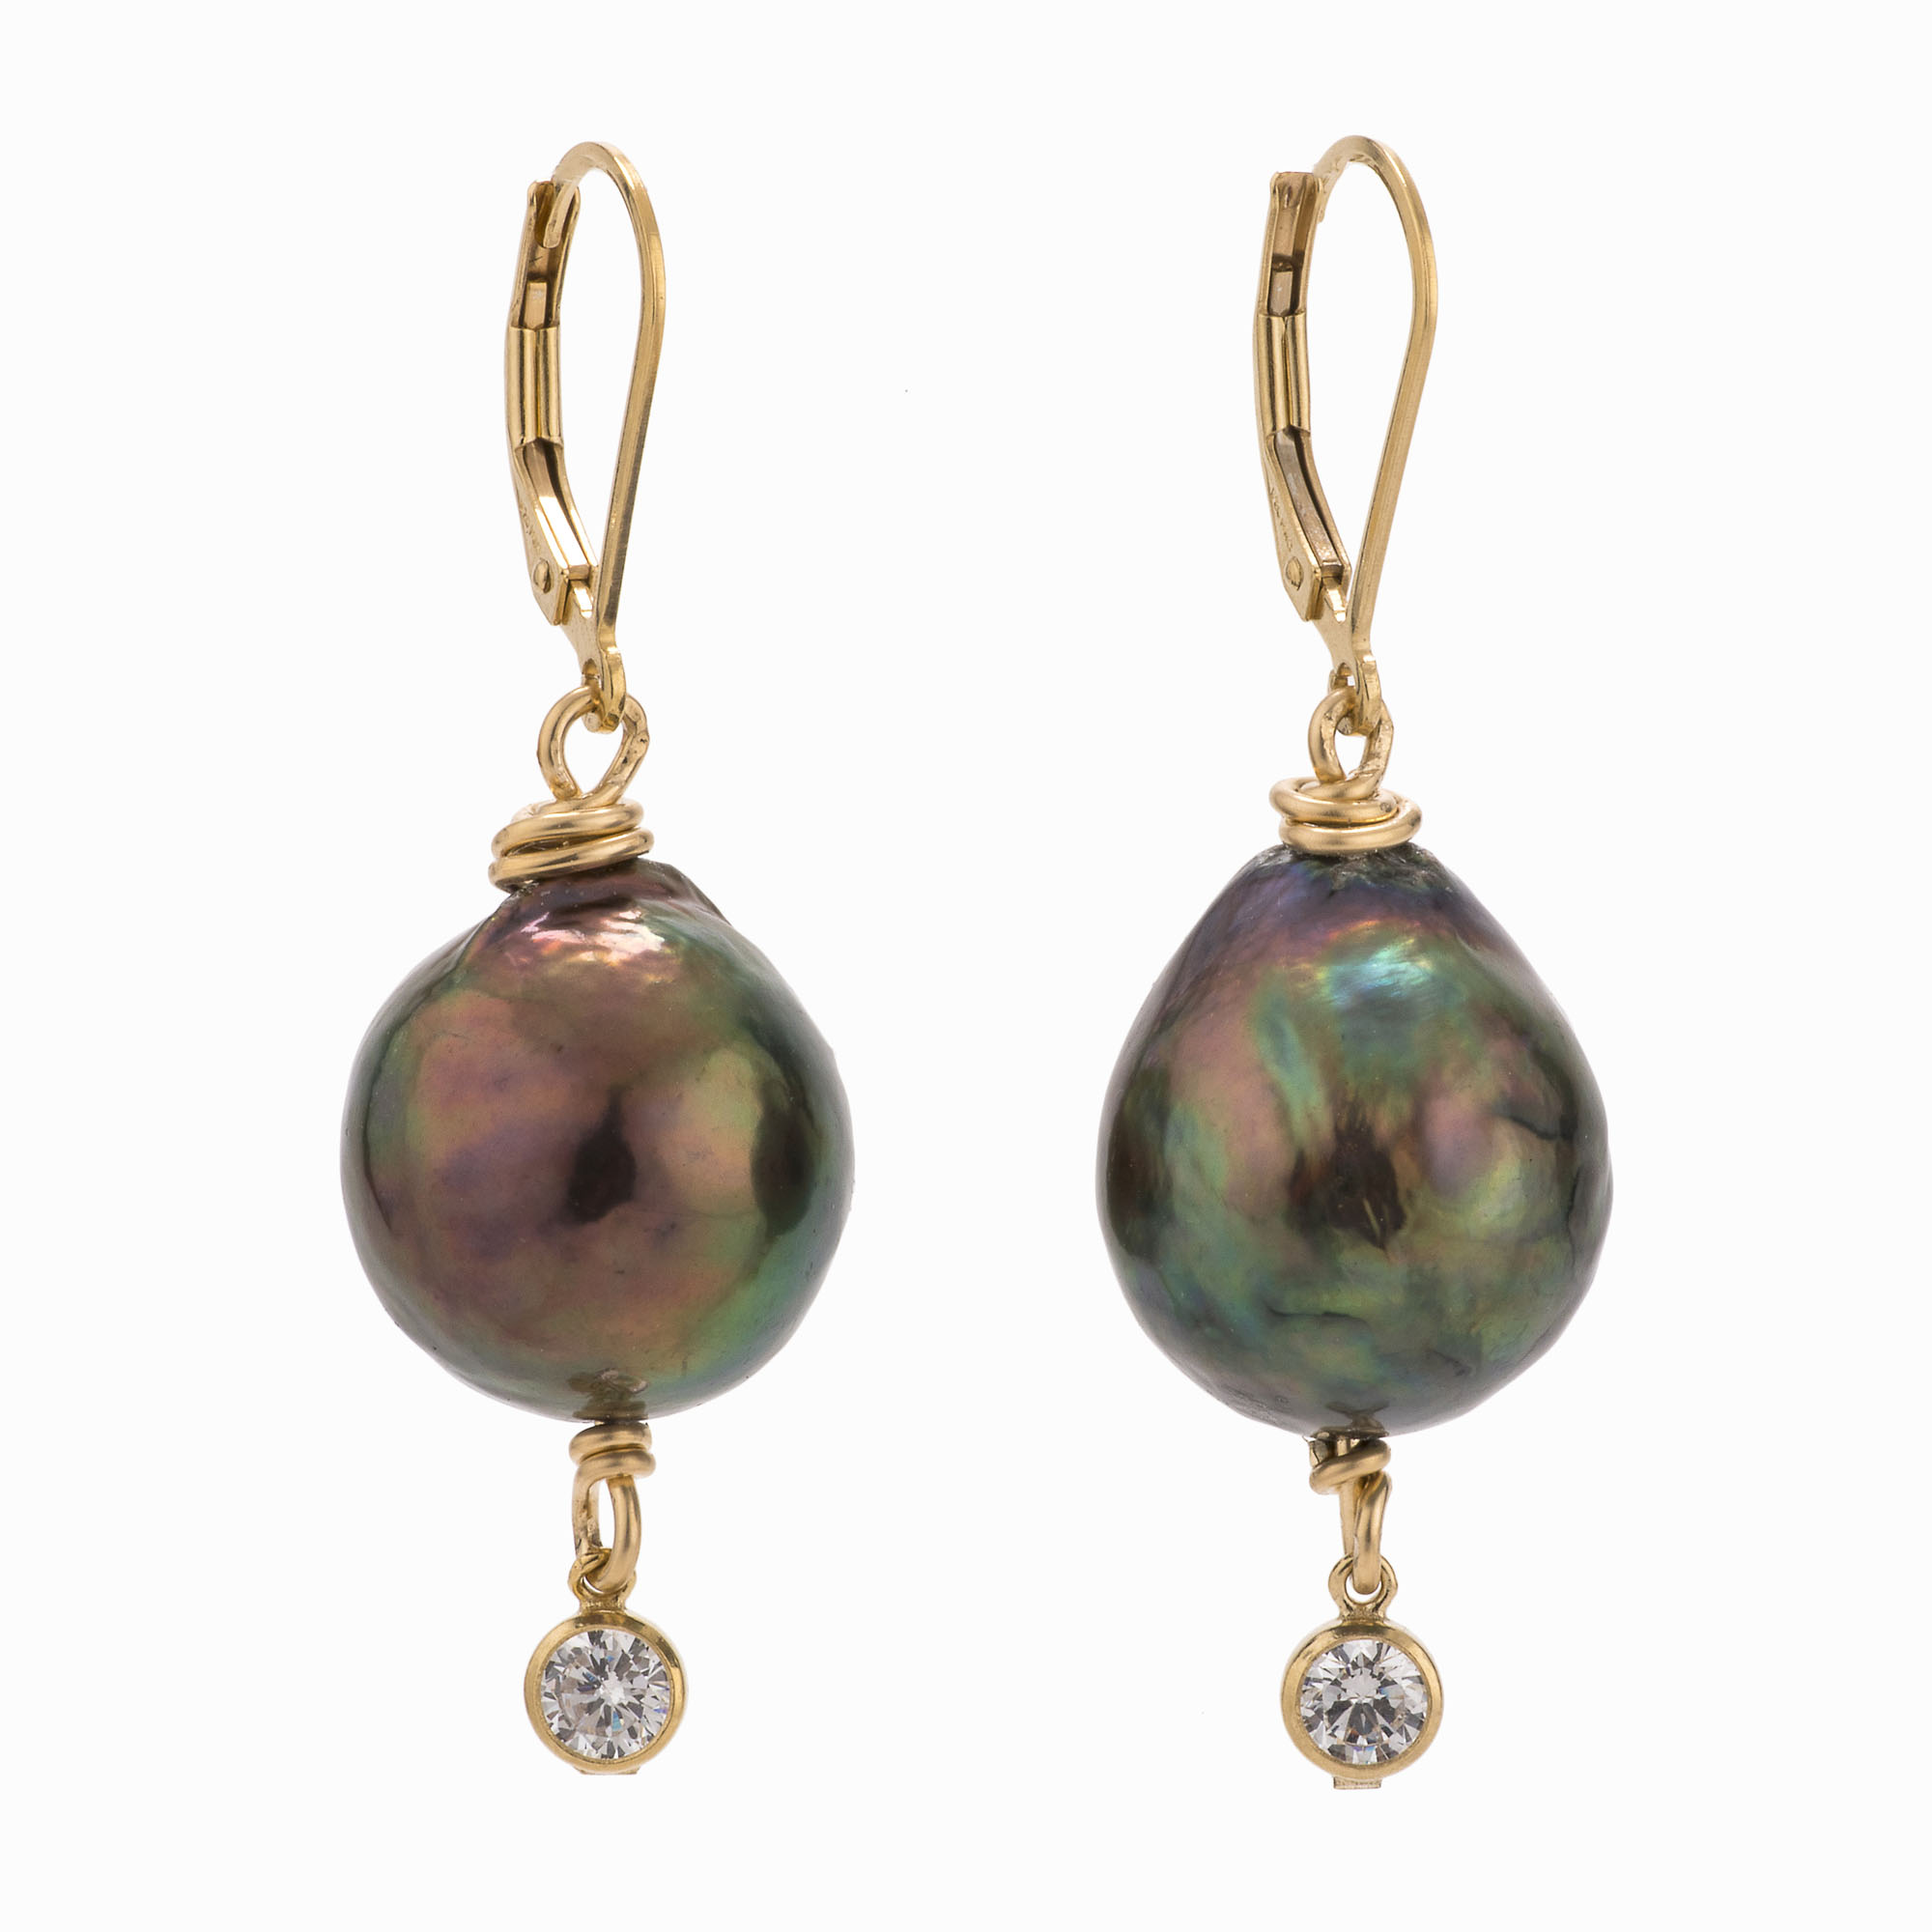 Featured image for “Solar Pearl Earrings”